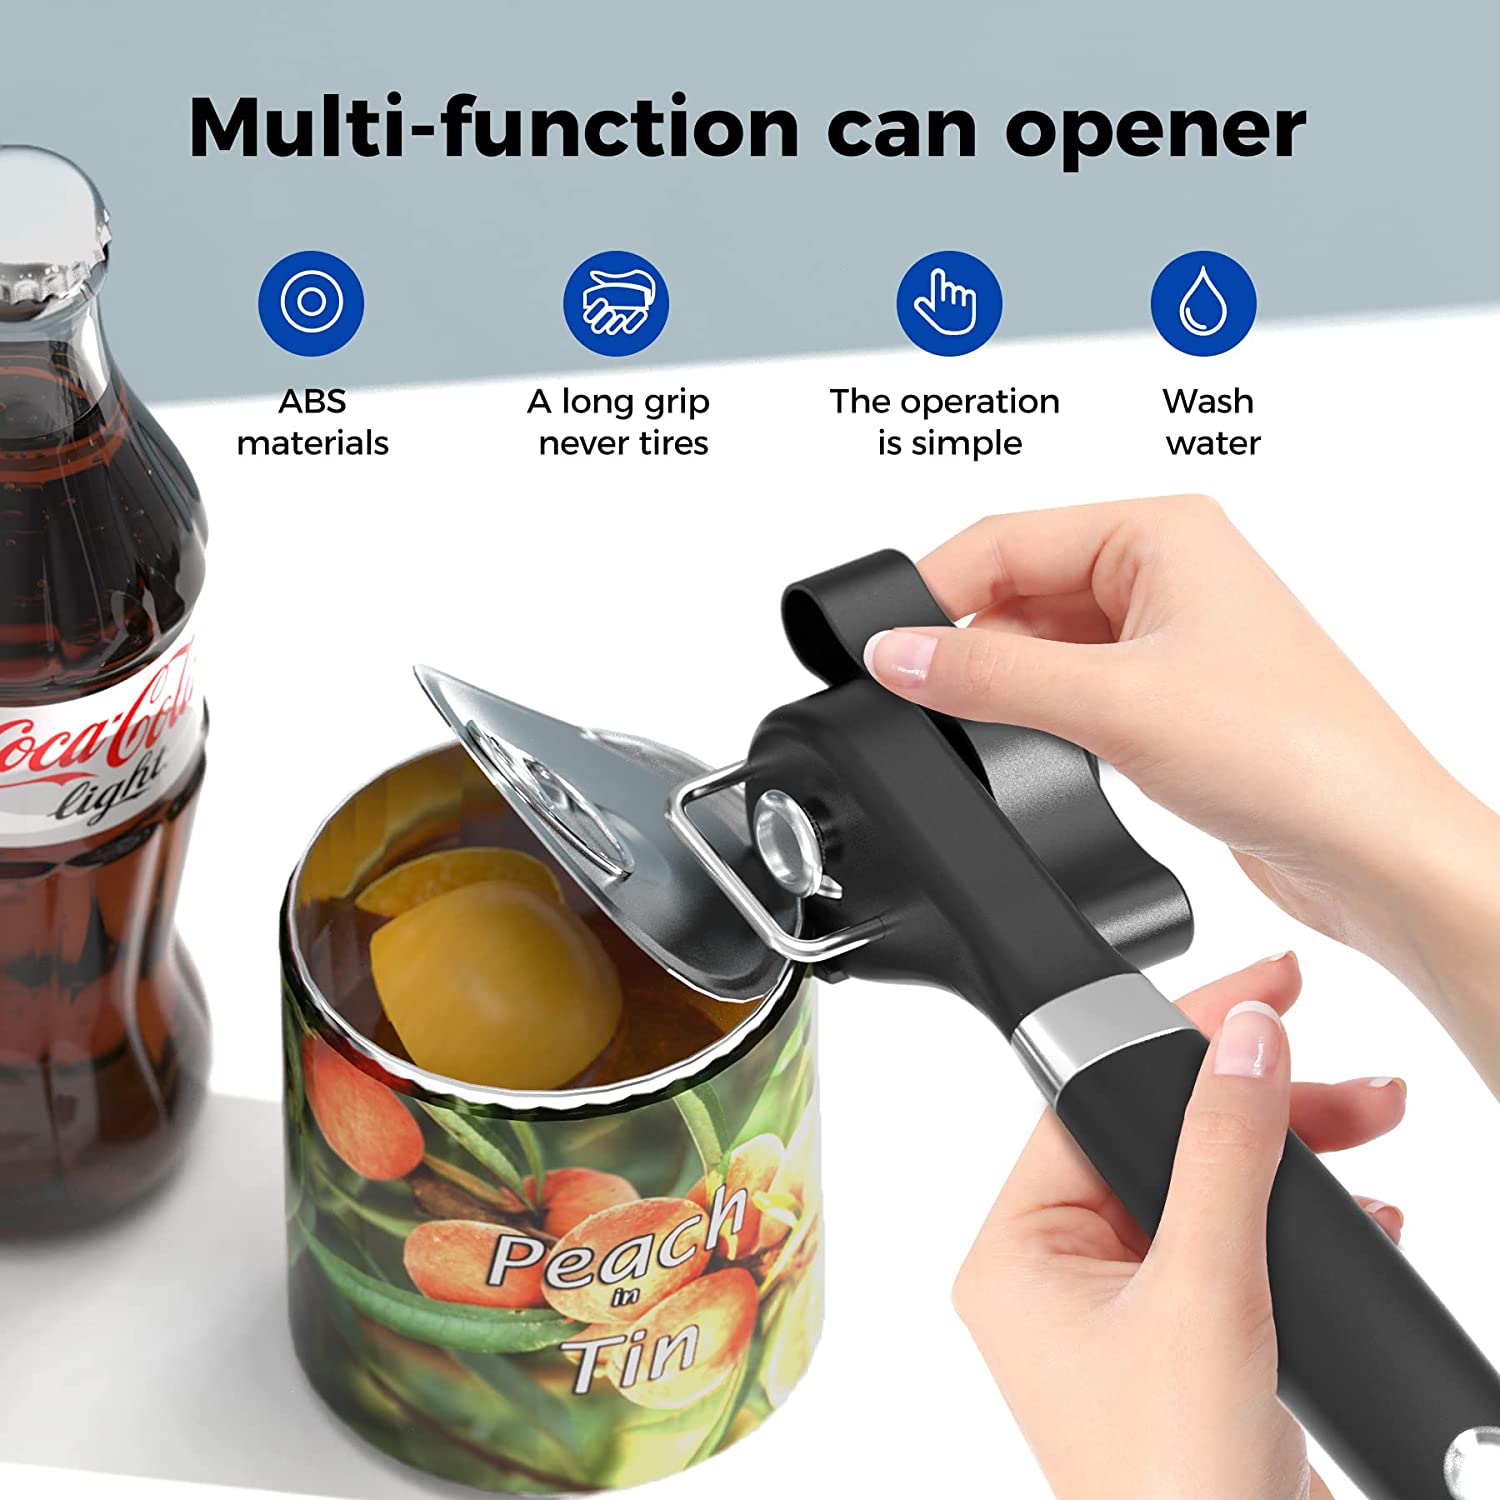 Sl Manual Side Cut Can Opener Set Stainless Steel Can Bottle Tin